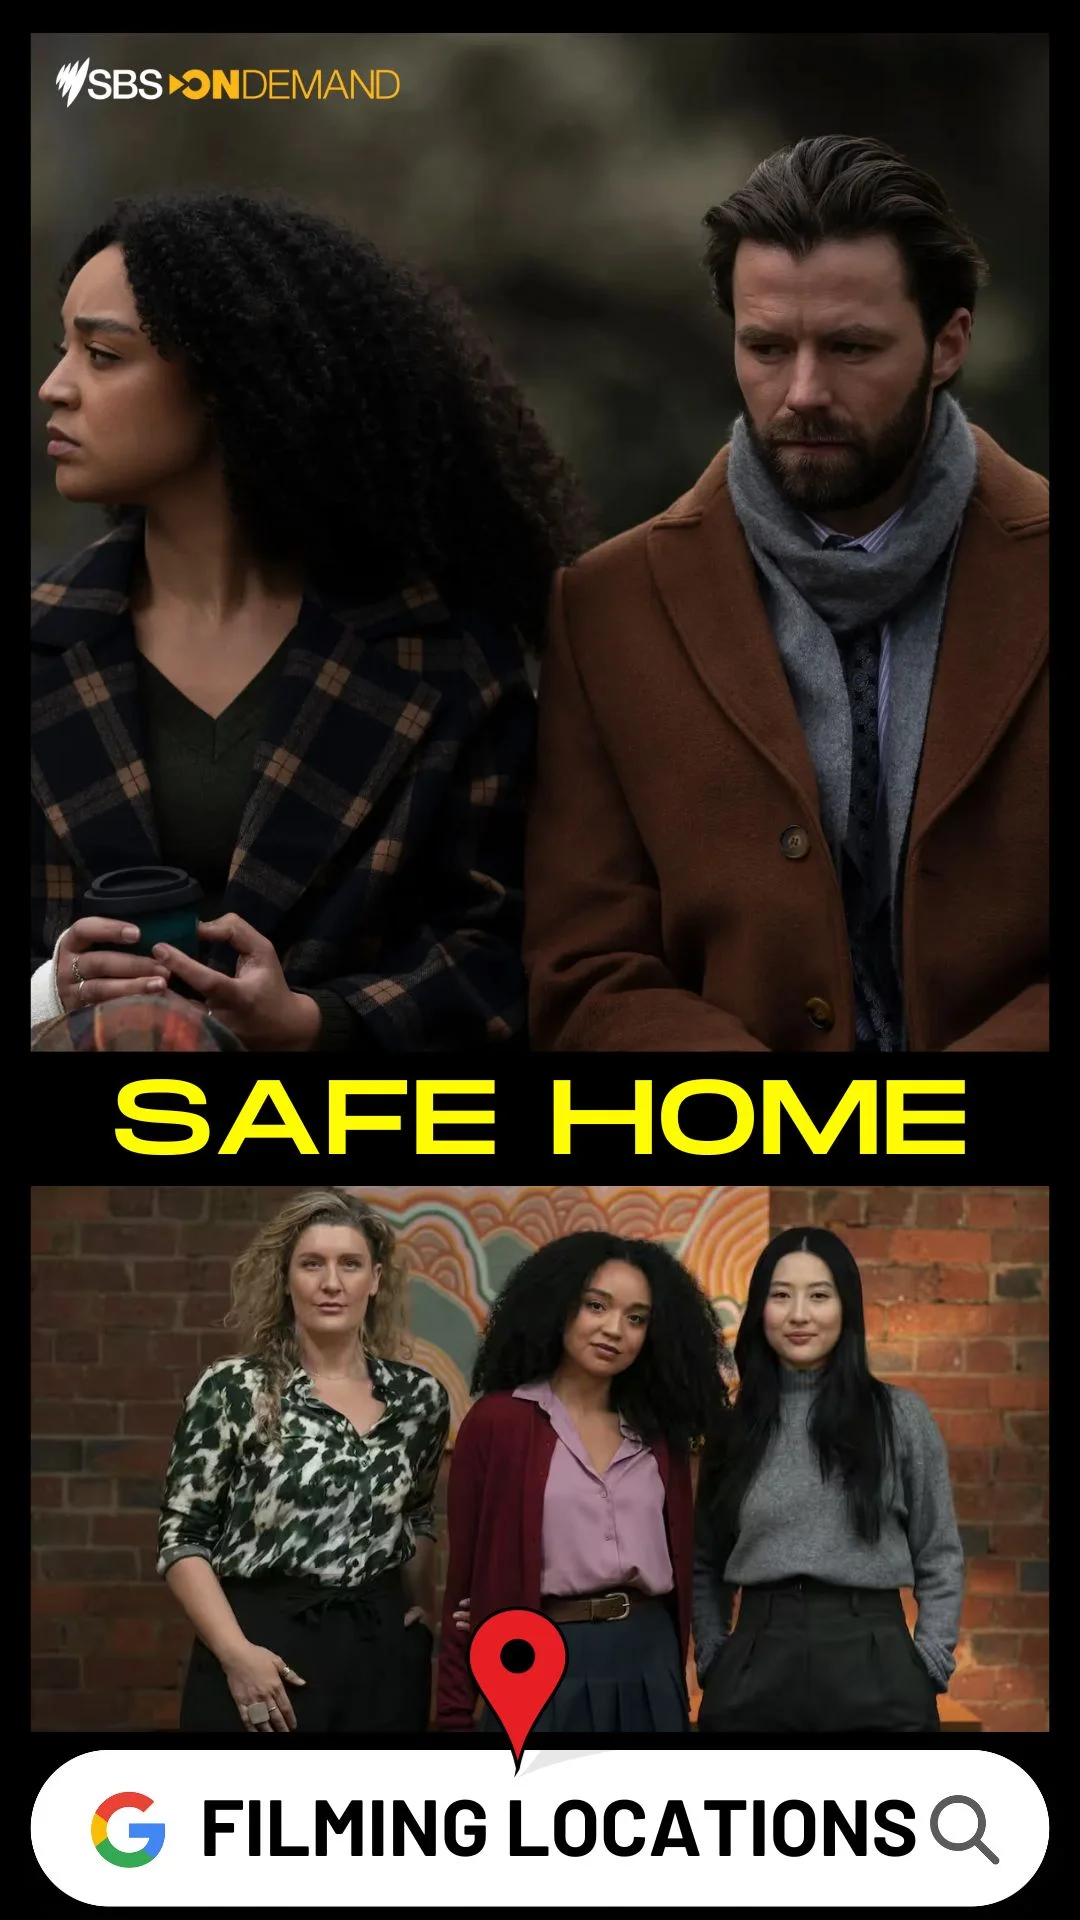 Safe Home Filming Locations